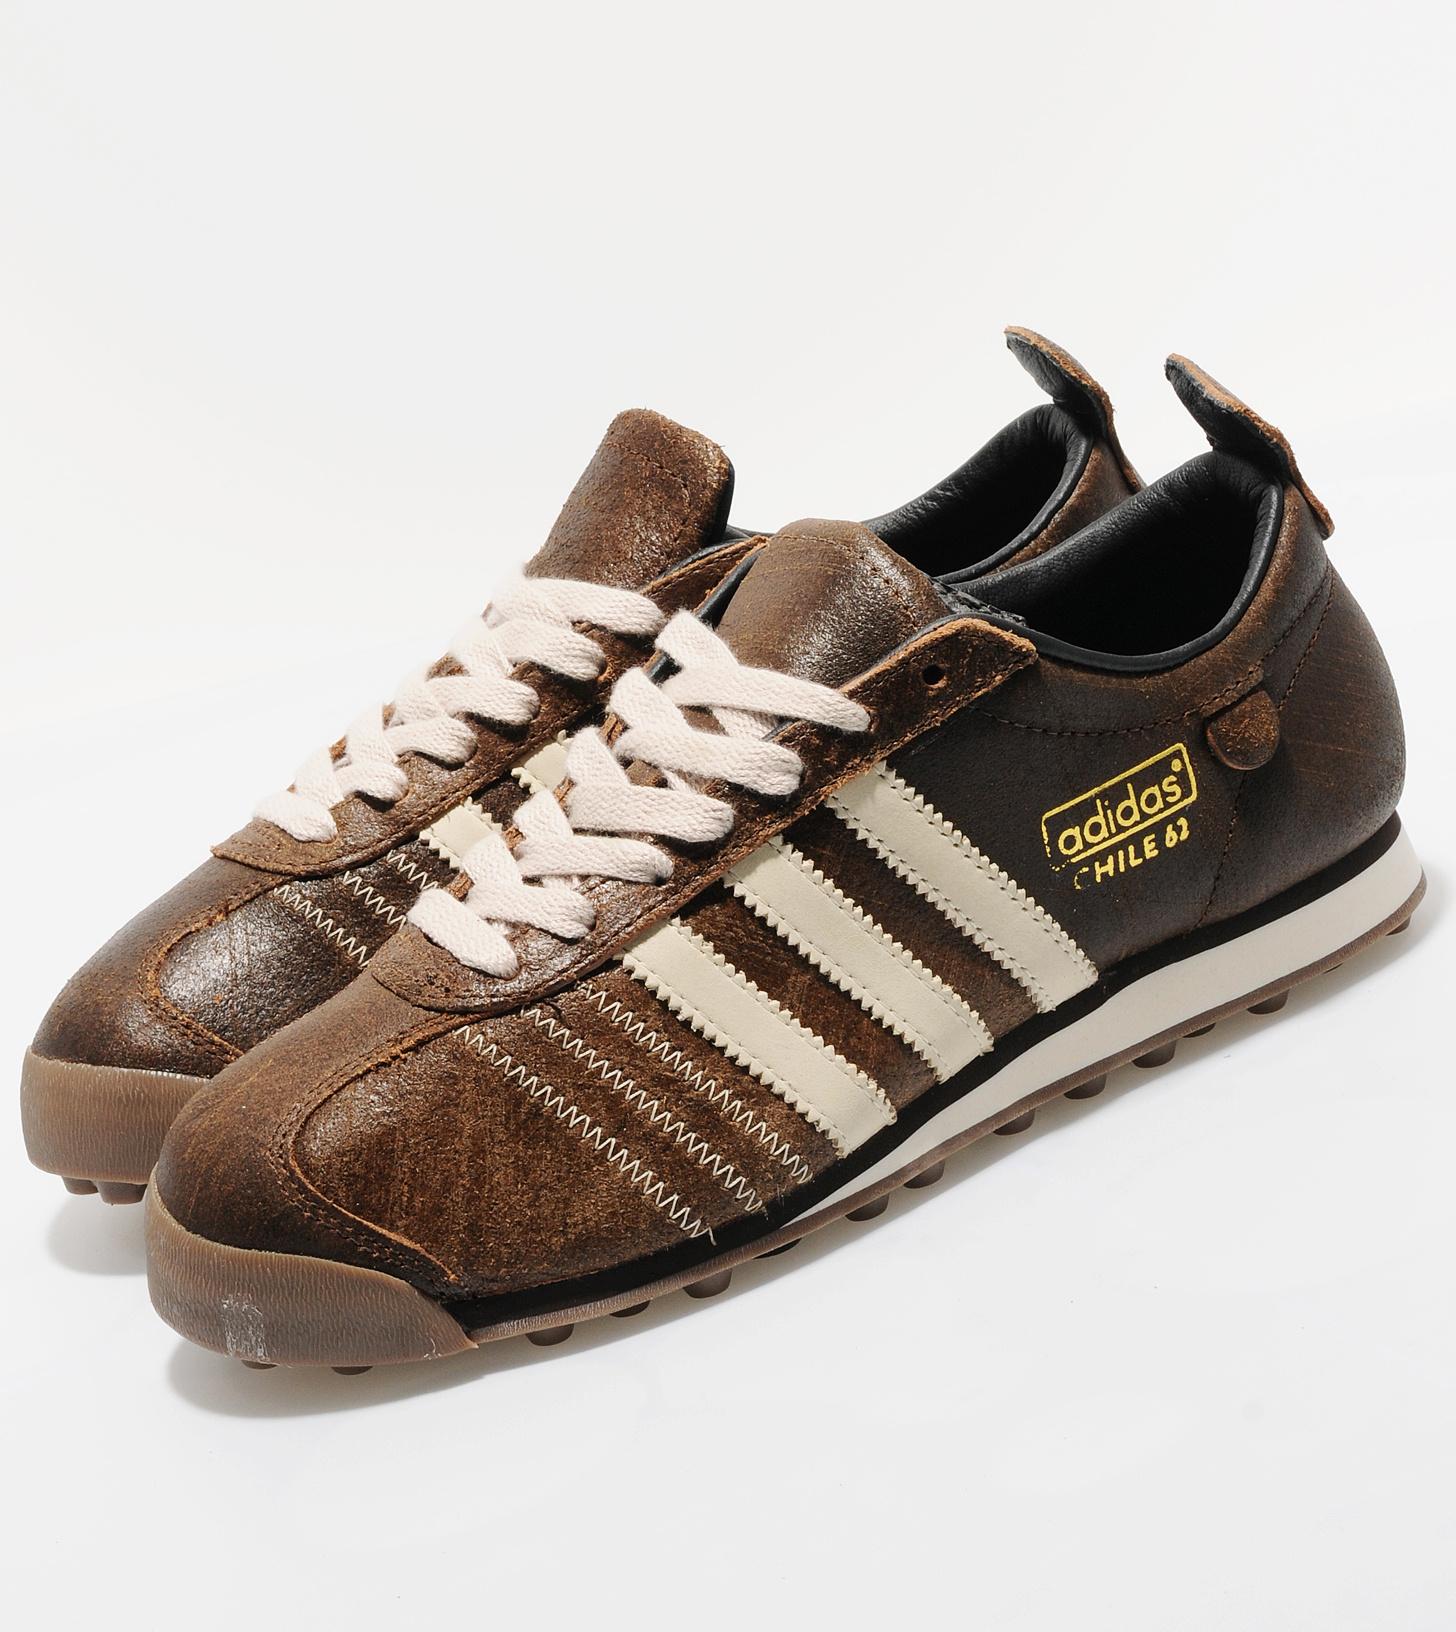 adidas chile 62 sneaker